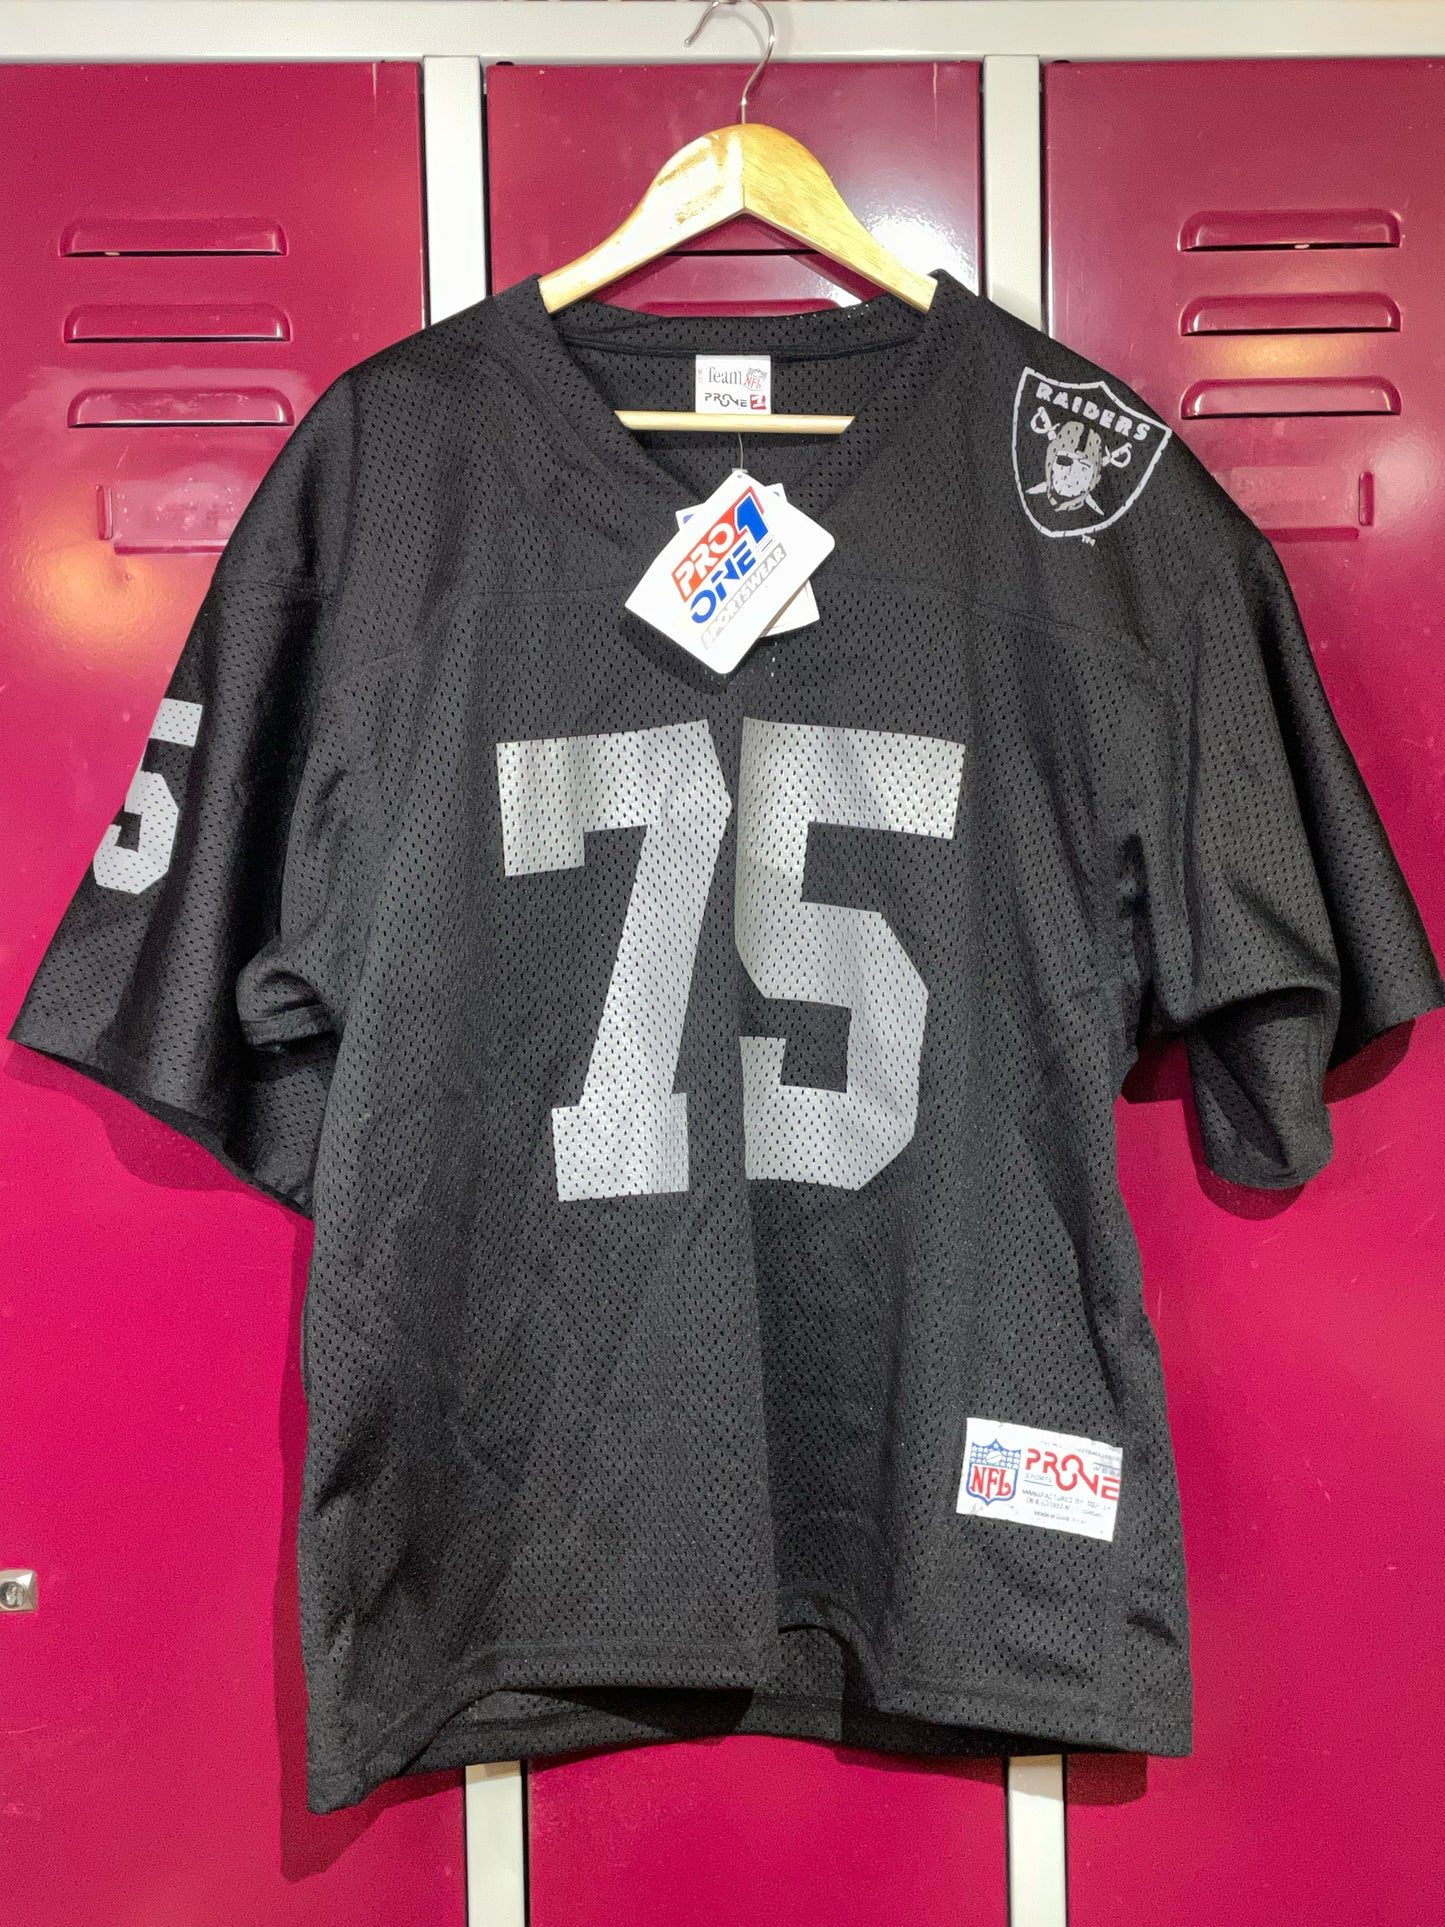 'DS' VINTAGE 90s PRO ONE LOS ANGELES RAIDERS '75' NFL JERSEY SZ: One size